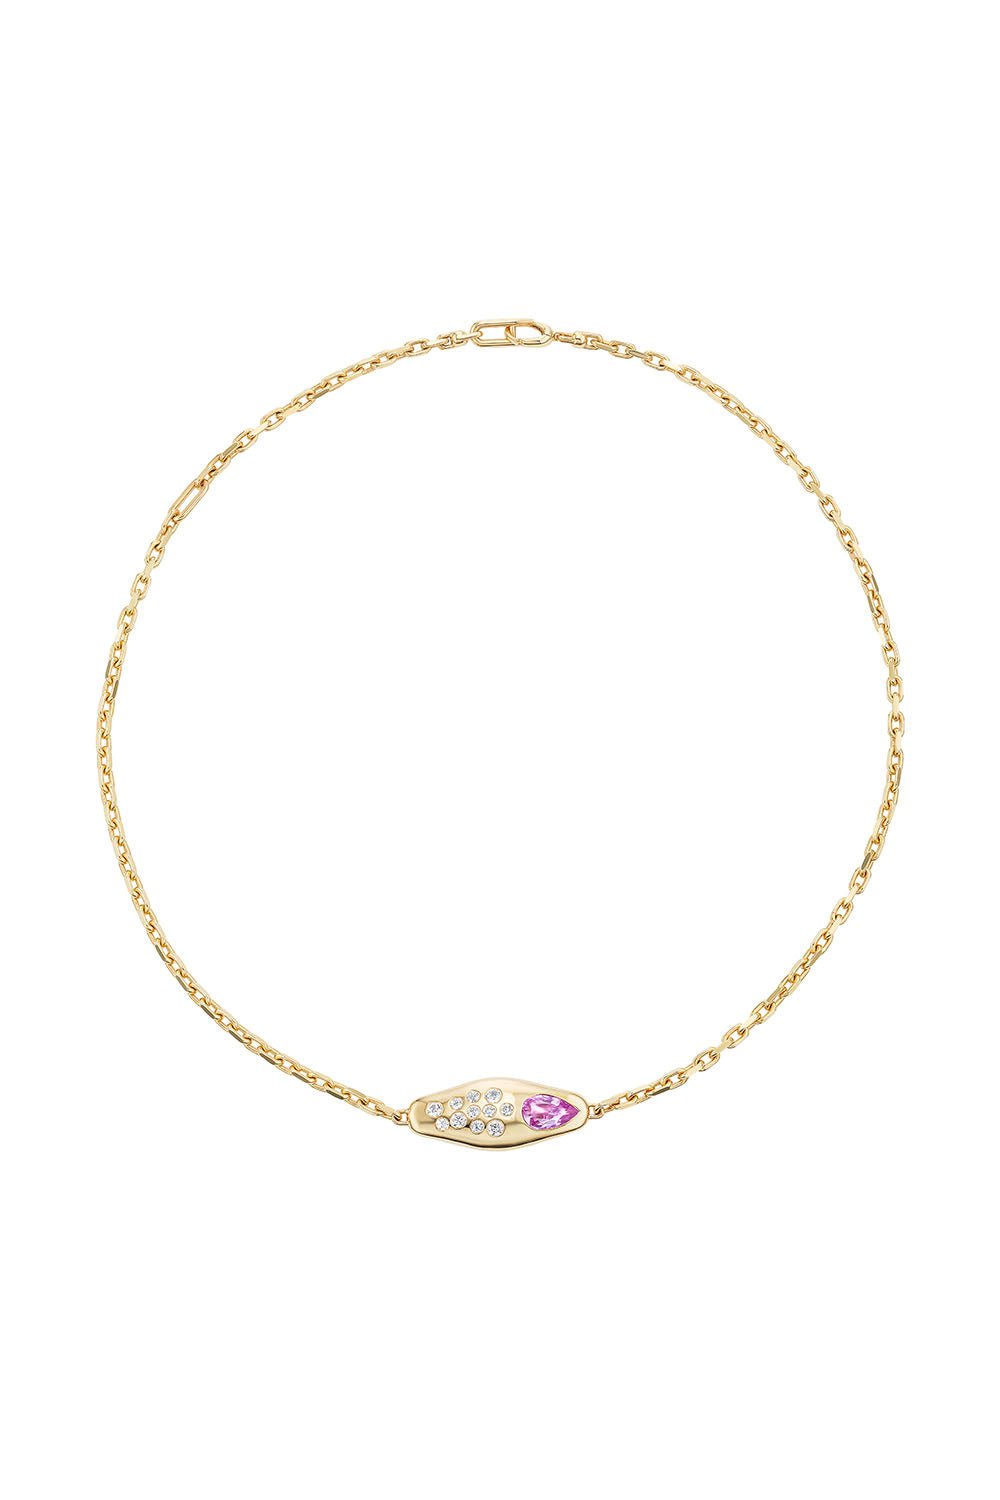 UNIFORM OBJECT-Pink Sapphire Vessel Necklace-YELLOW GOLD